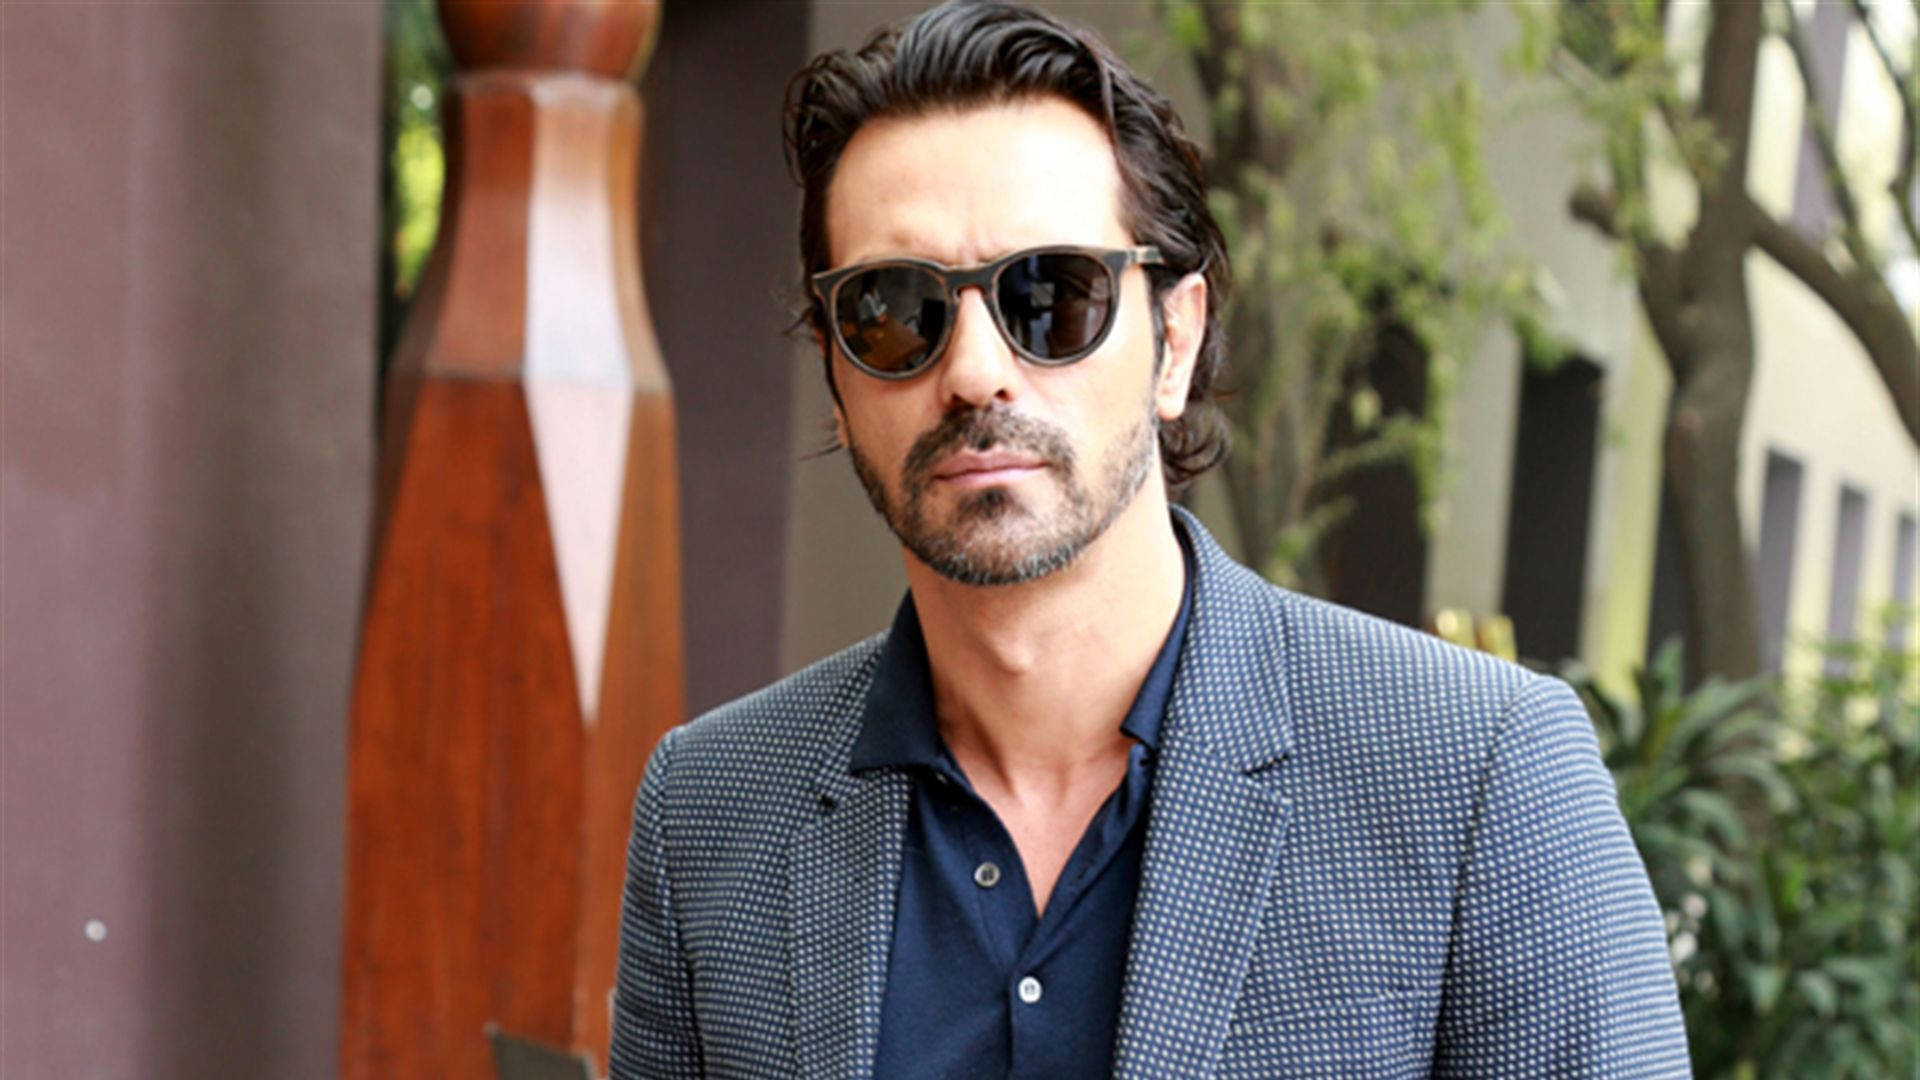 Arjun Rampal In Checkered Suit Background